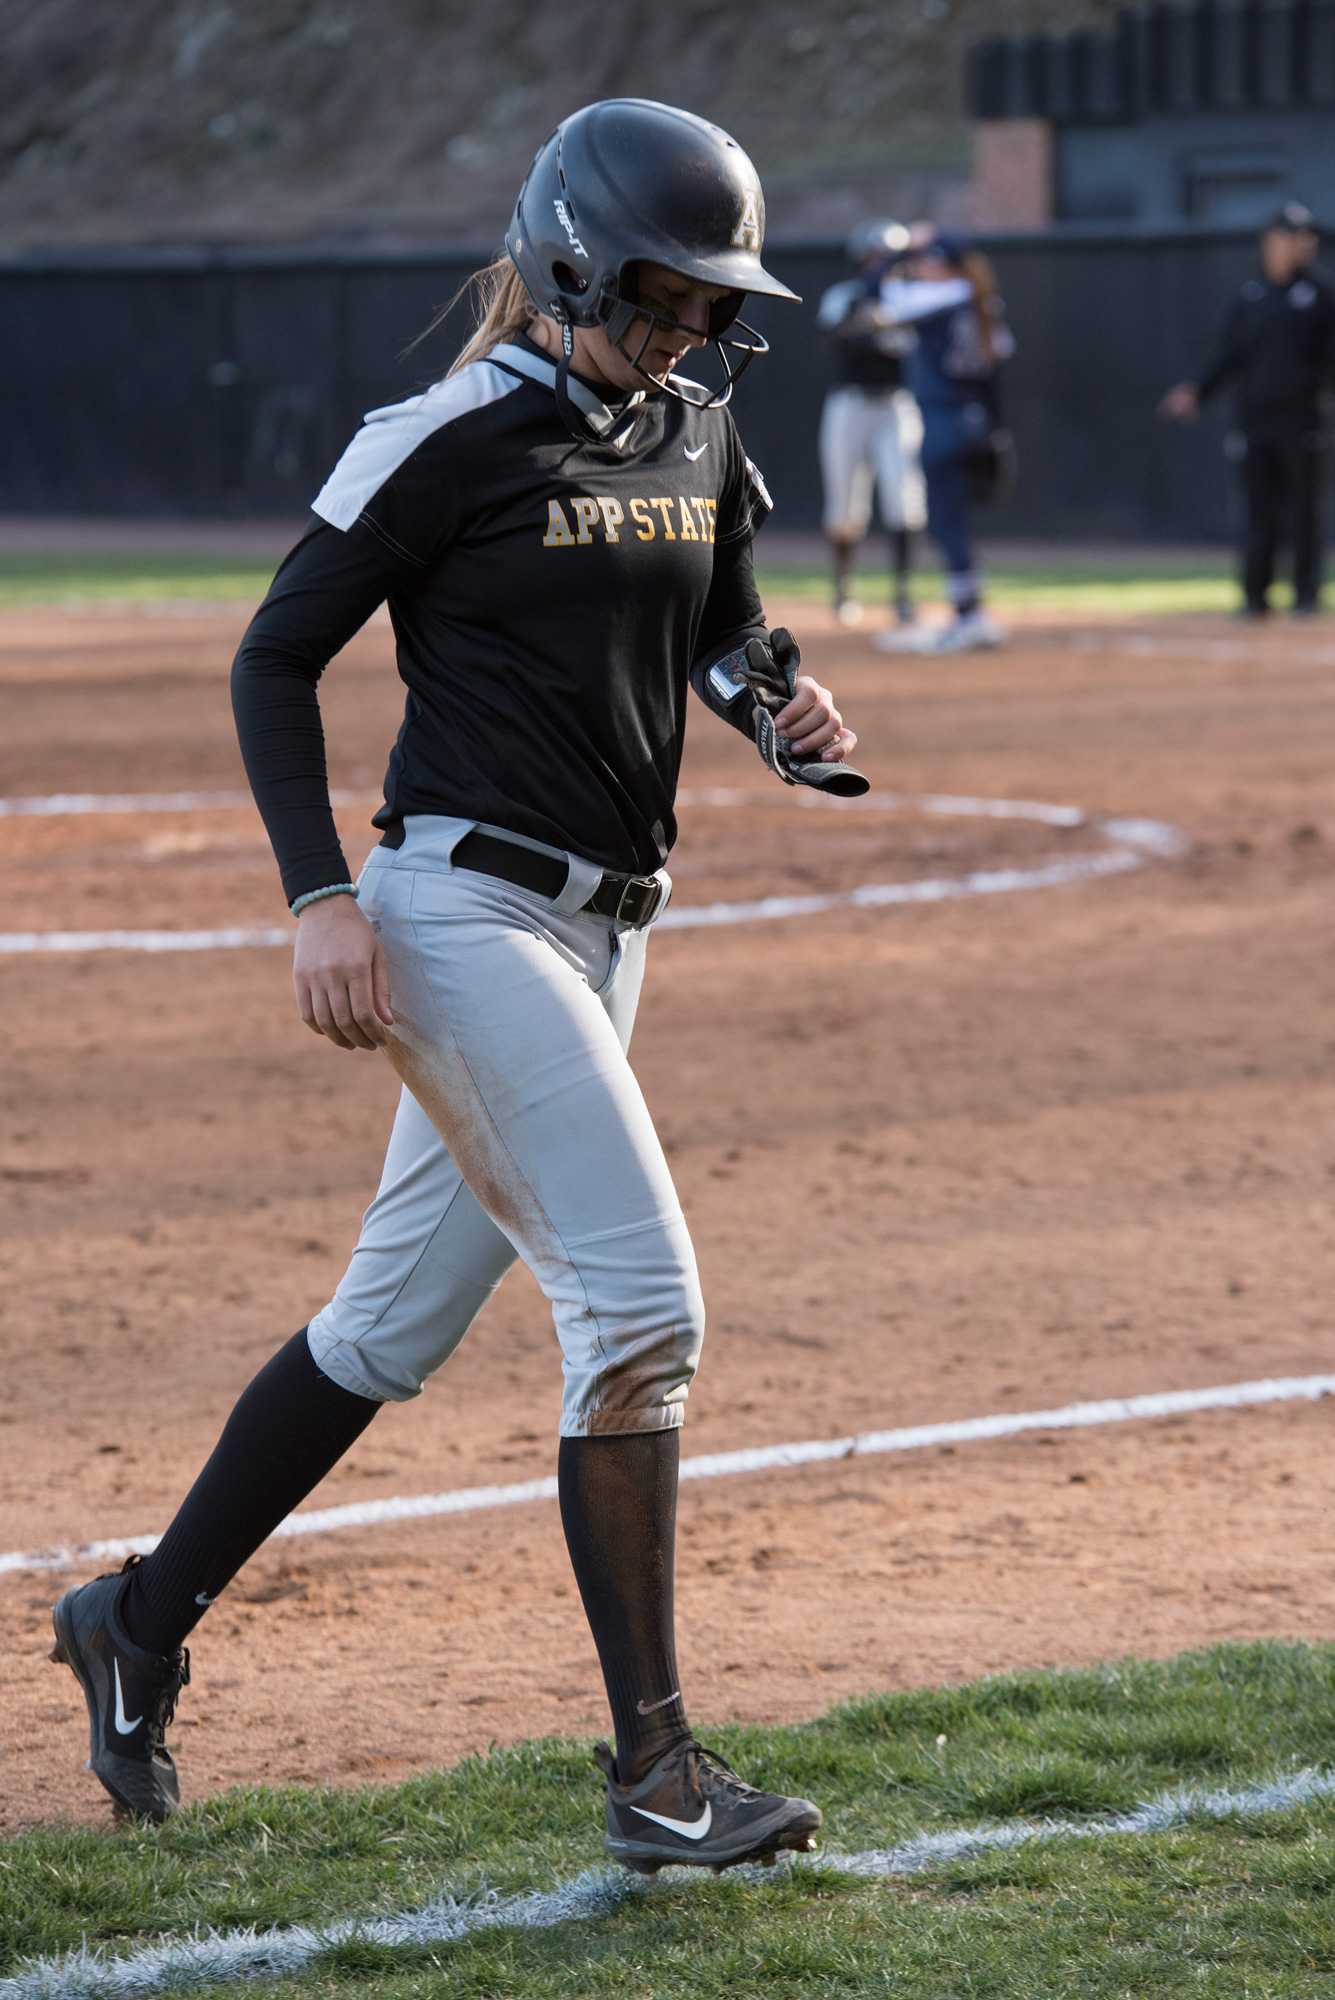 Junior+Ally+Walters+gets+out+at+second+base+during+the+double+header+against+UNCG+in+2017.+Ally+hit+a+grand+slam+during+the+second+game+giving+the+Mountaineers+4+runs+in+one+inning.